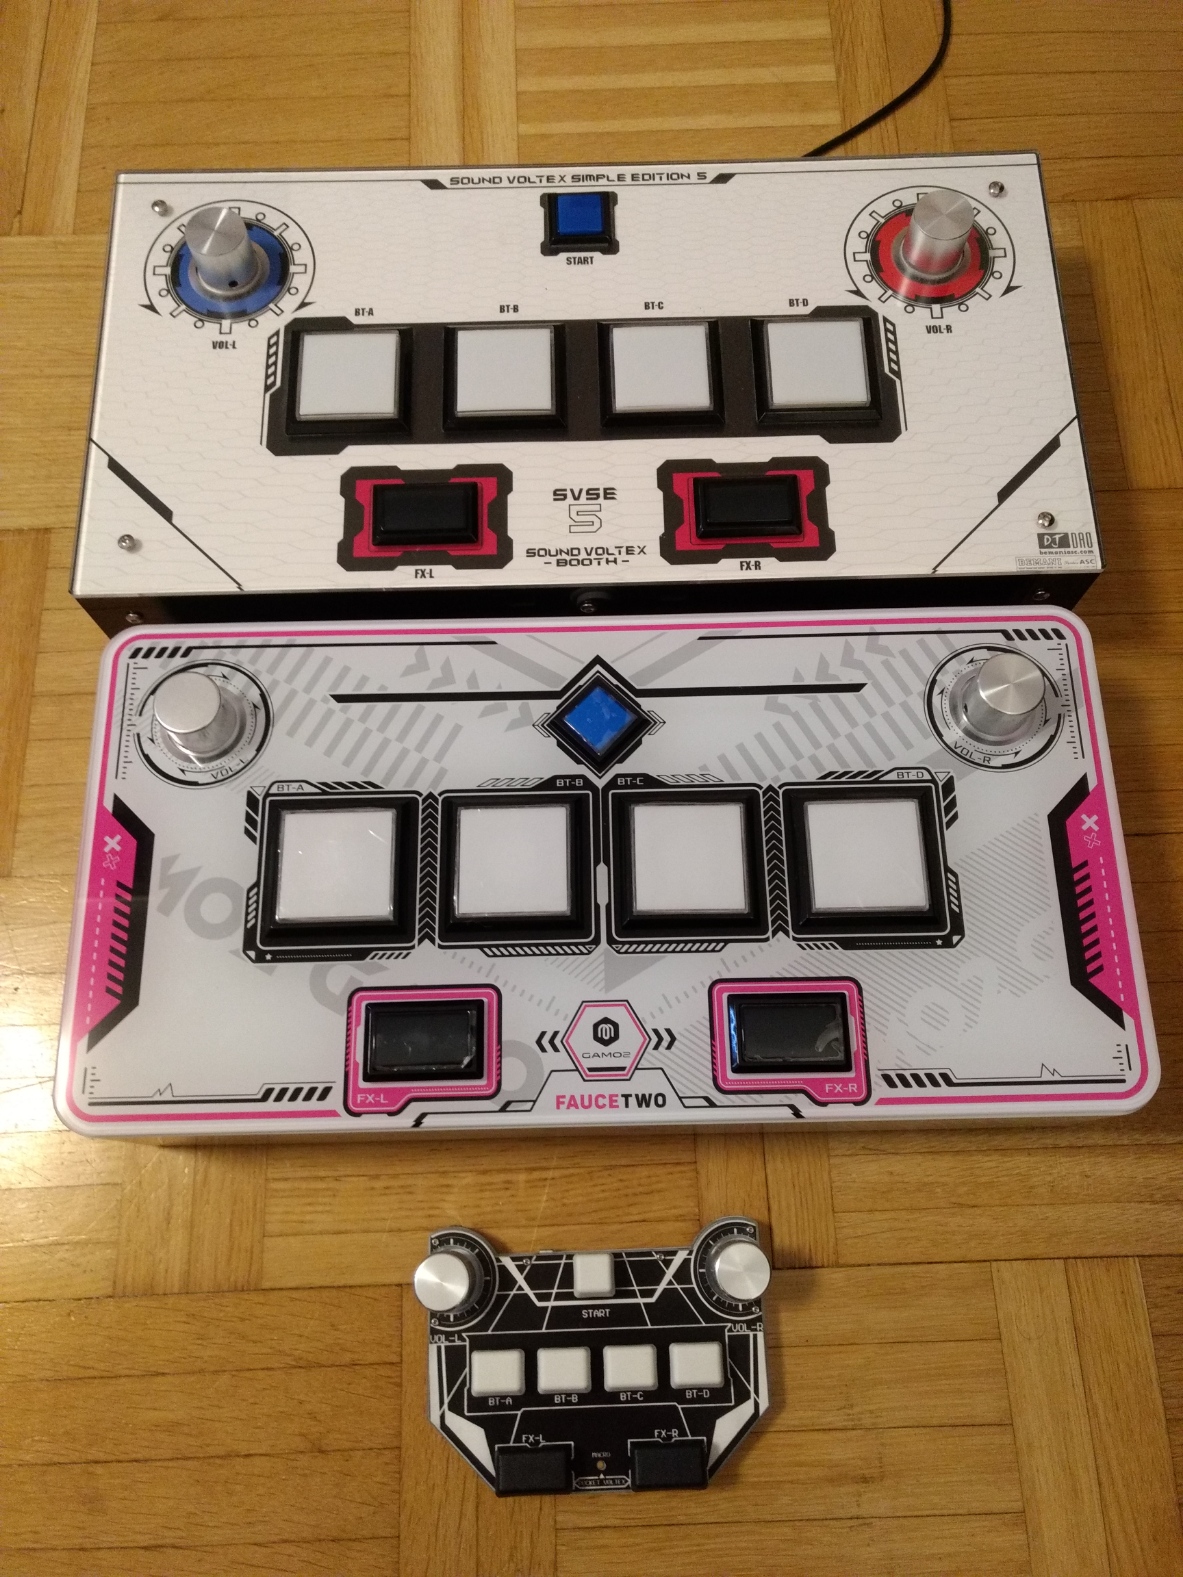 FAUCETWO SOUND VOLTEX コントローラー smcint.com